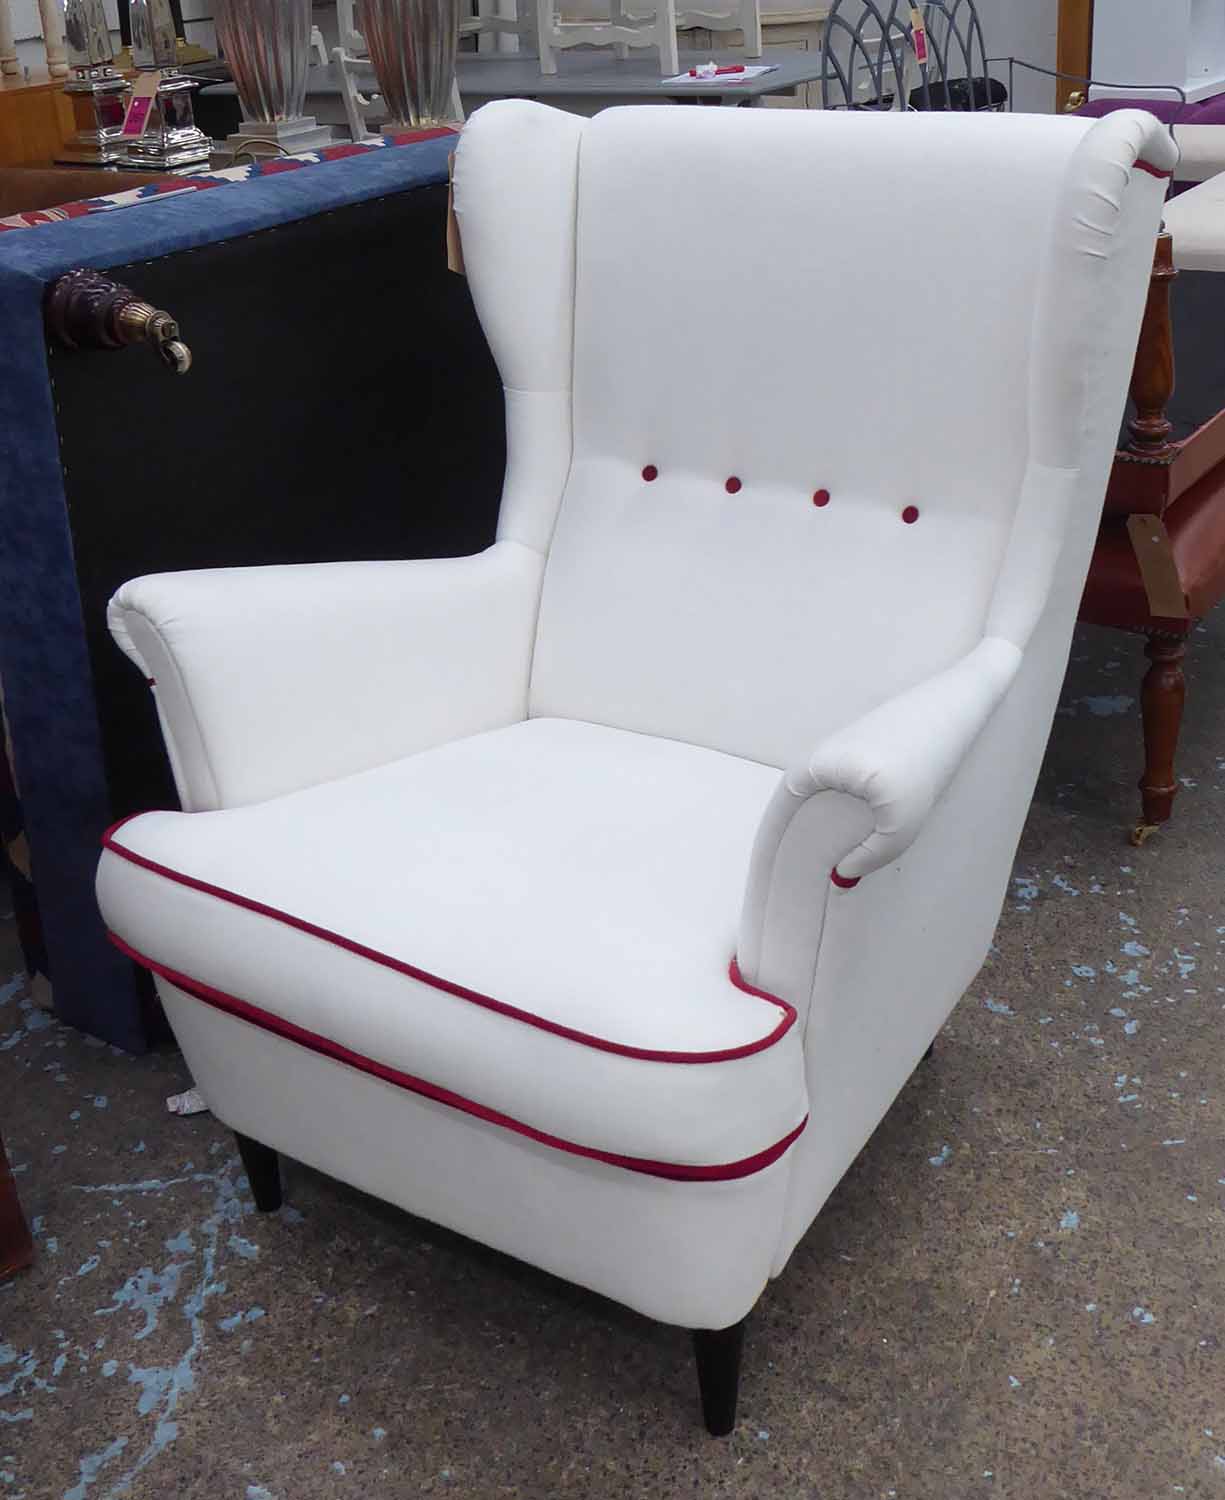 WING BACK ARMCHAIR, 1960's Italian style white with red button and piping detail, 100cm x 84cm W.